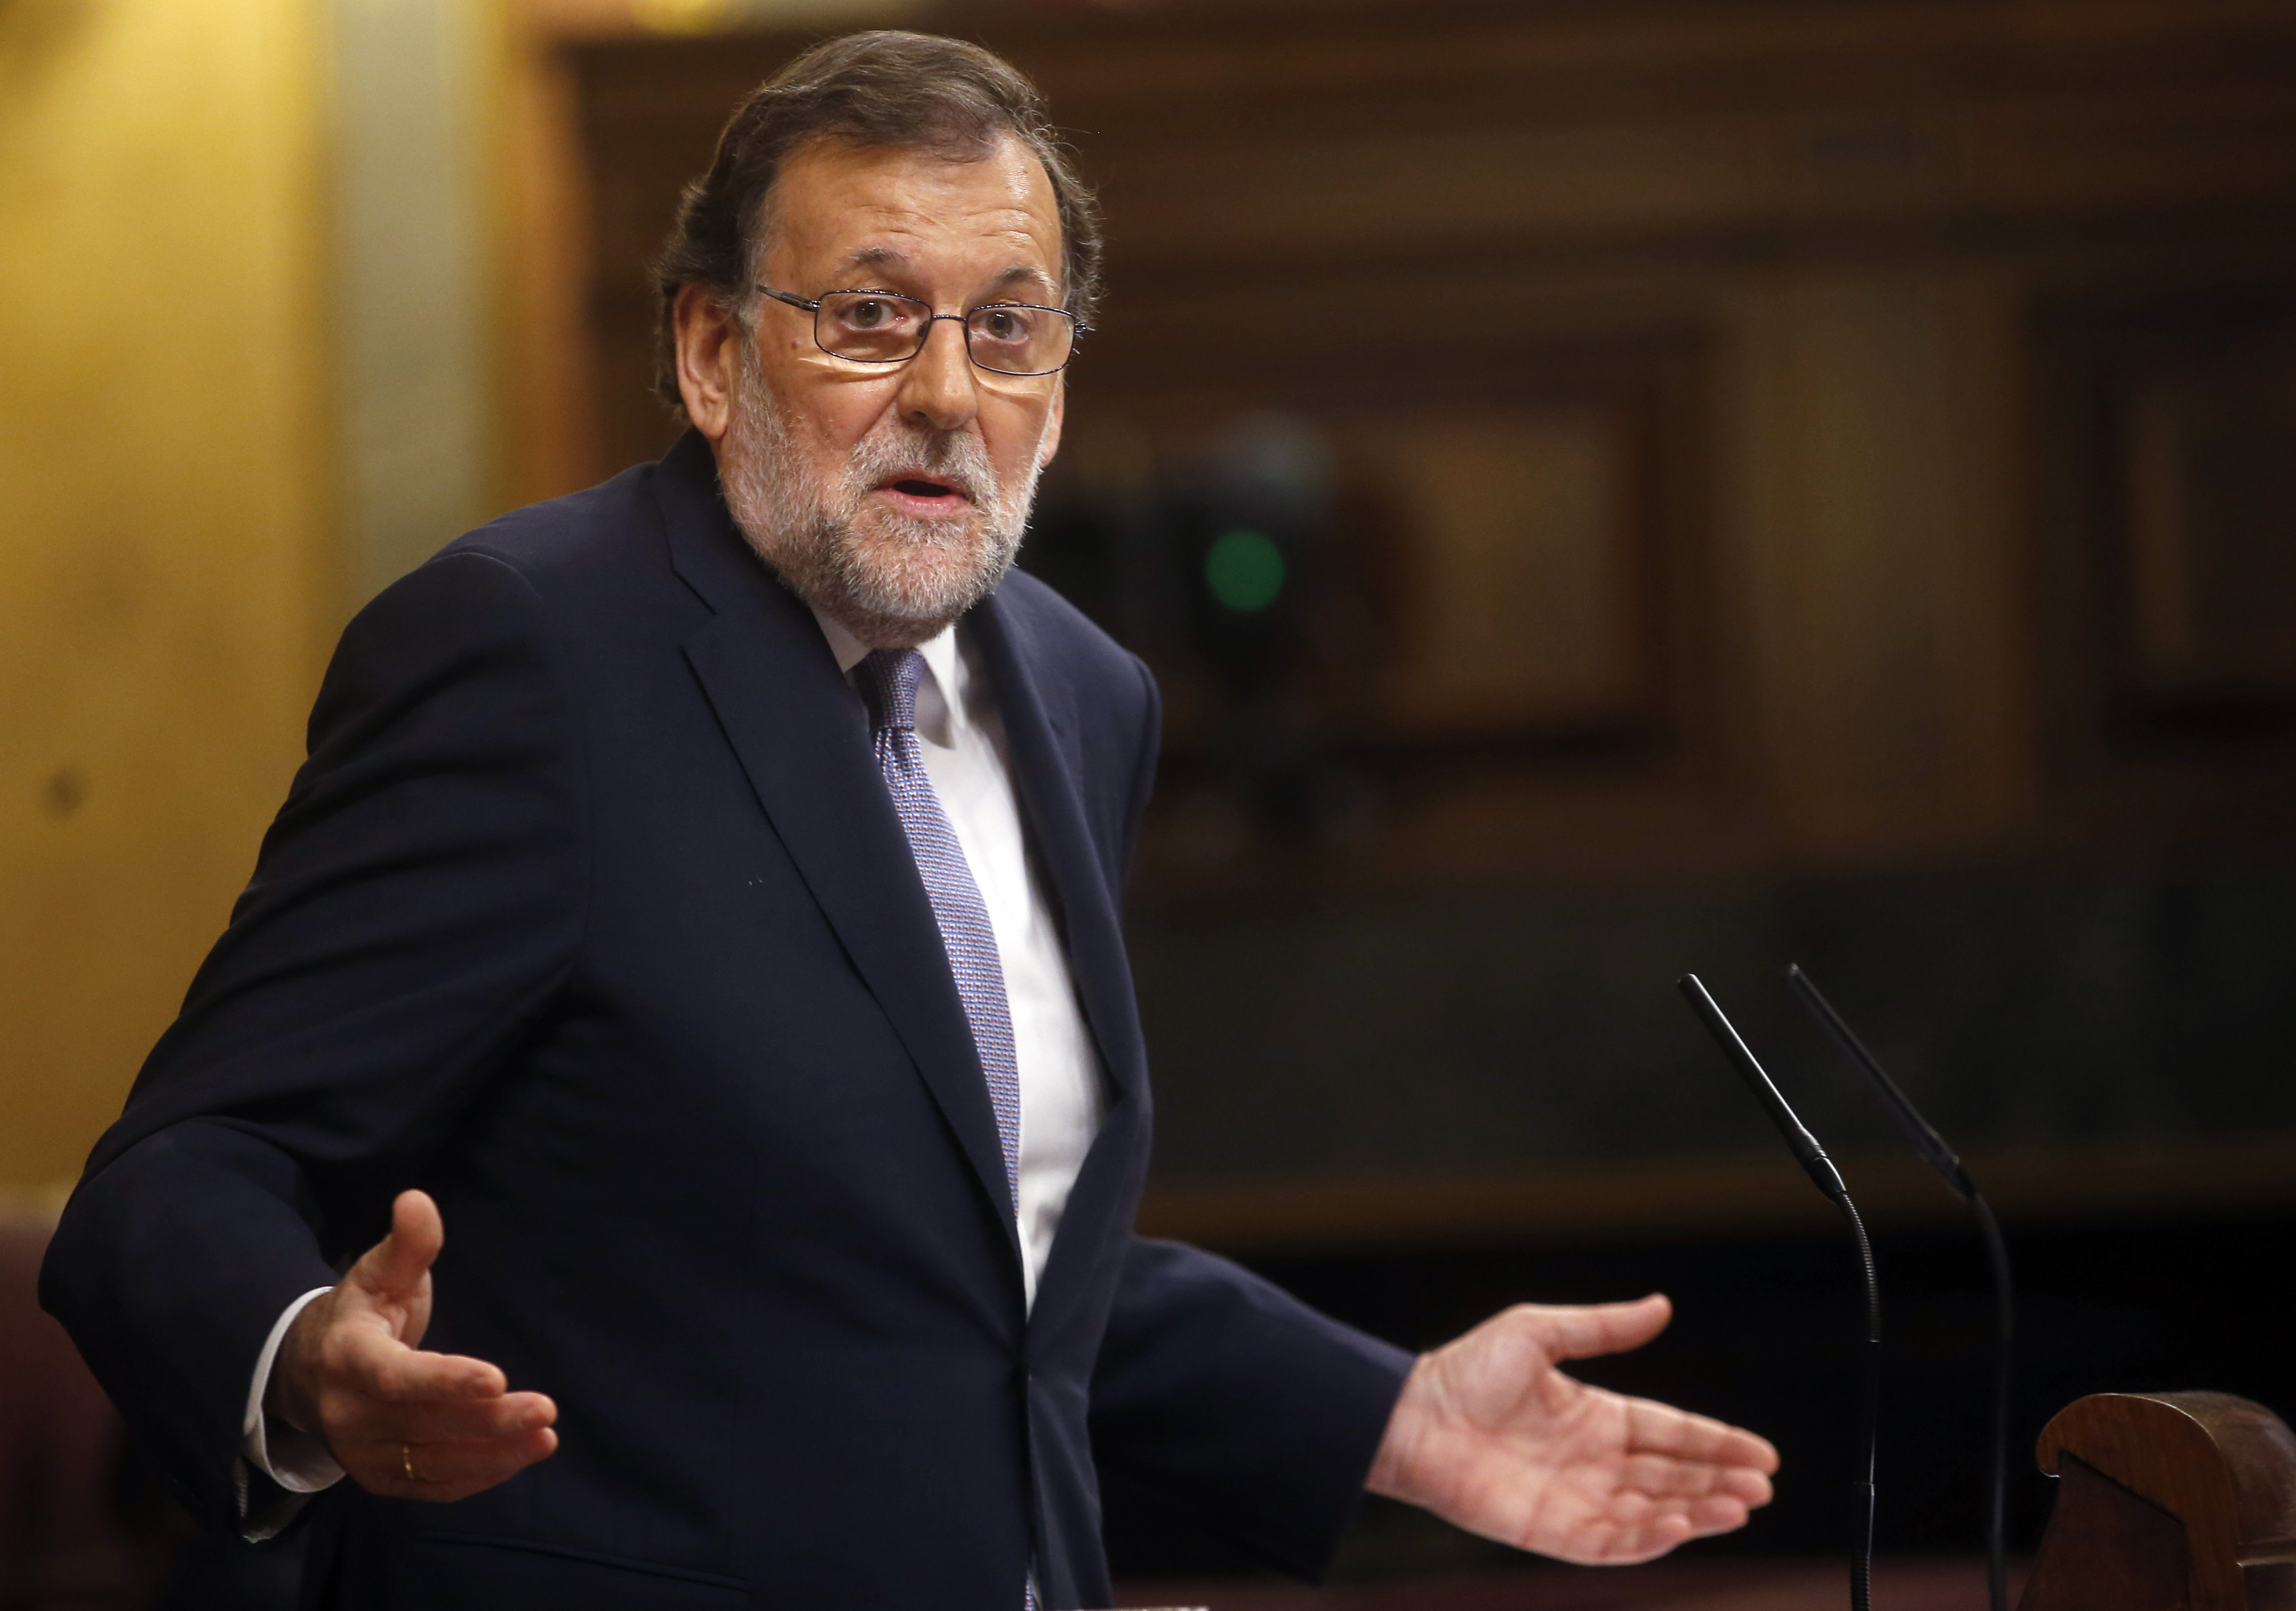 The leader of the PP, Mariano Rajoy, during his confidence vote in the Spanish Parliament (by ACN)